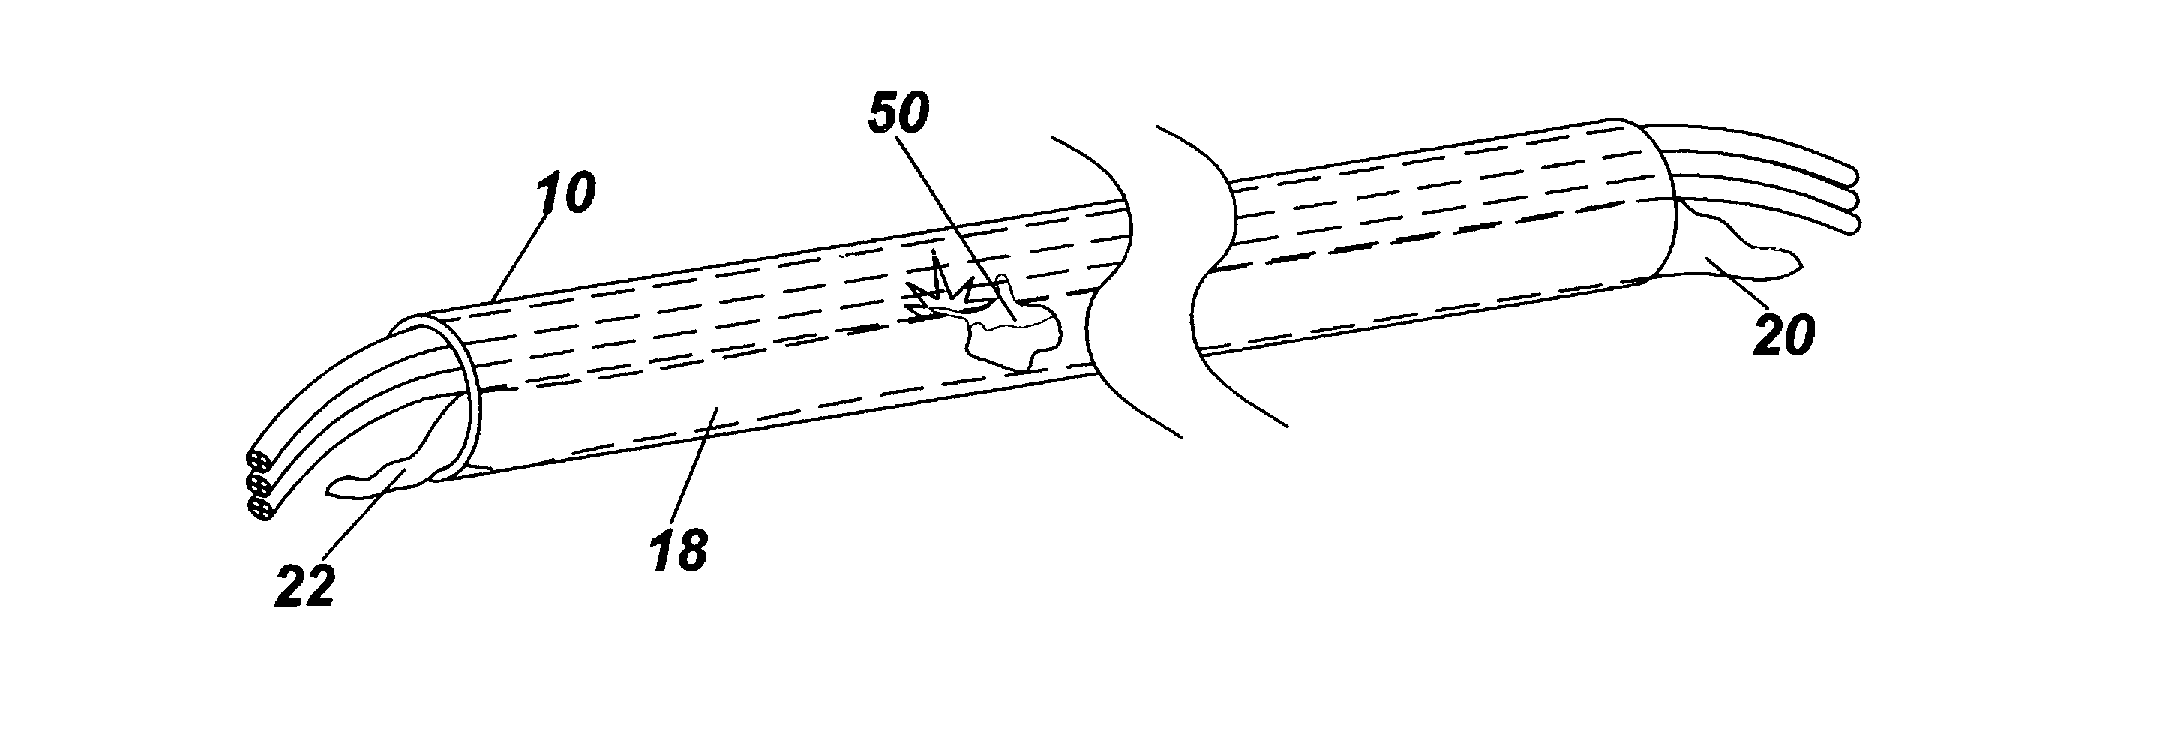 Method and Device for Suppressing Electrical Fires in Underground Conduit